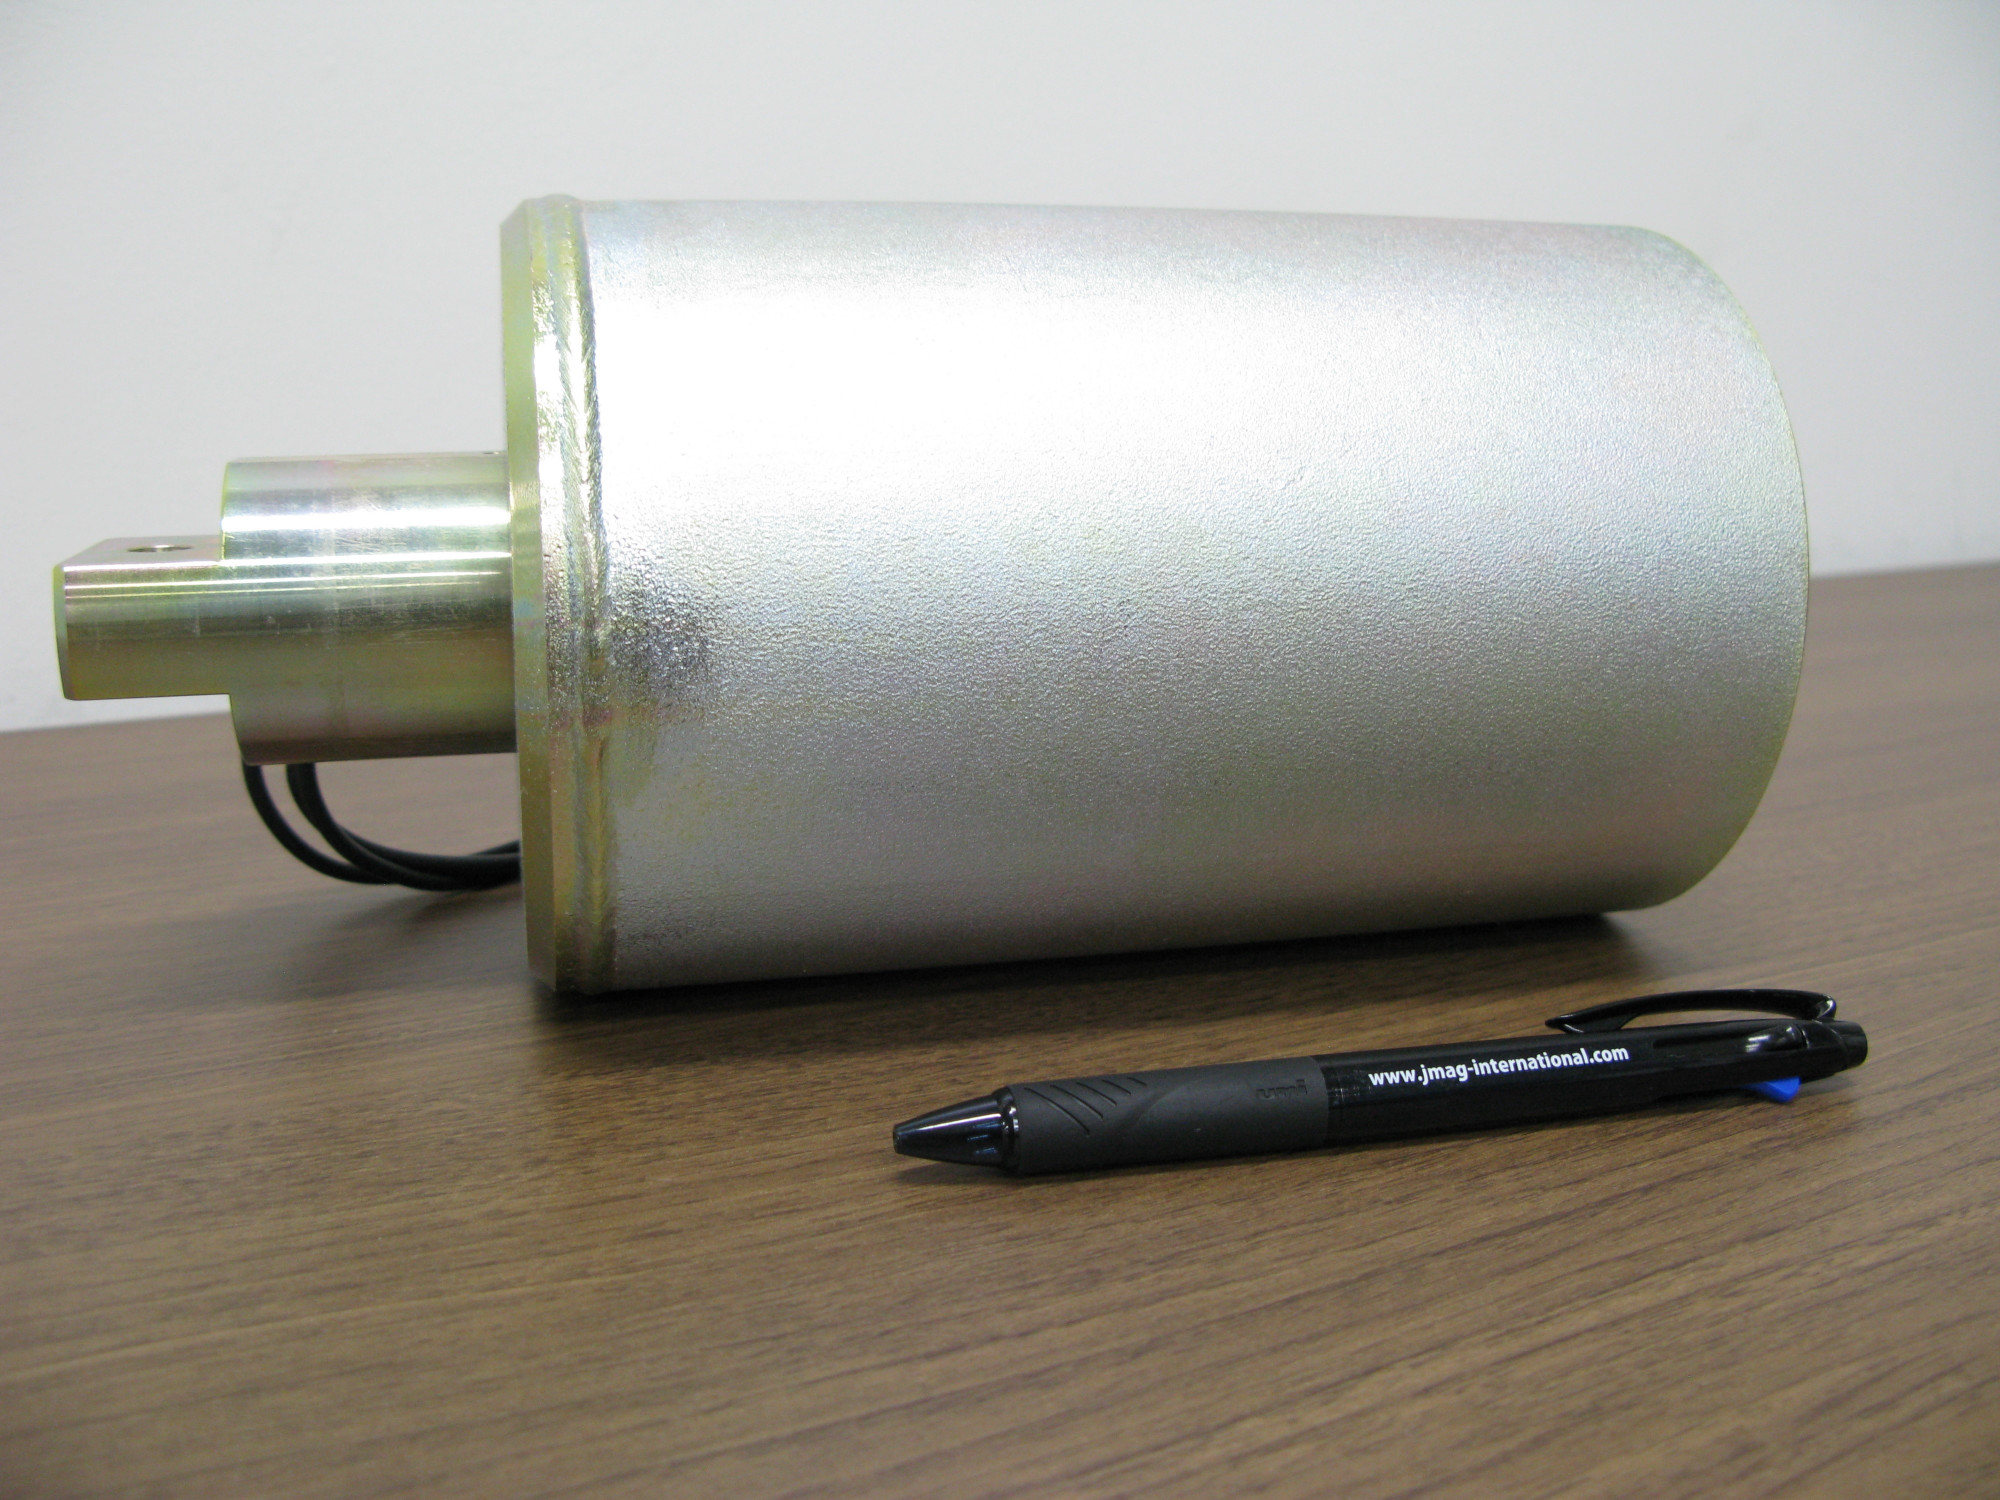 Cylindrical solenoid (actual machine)